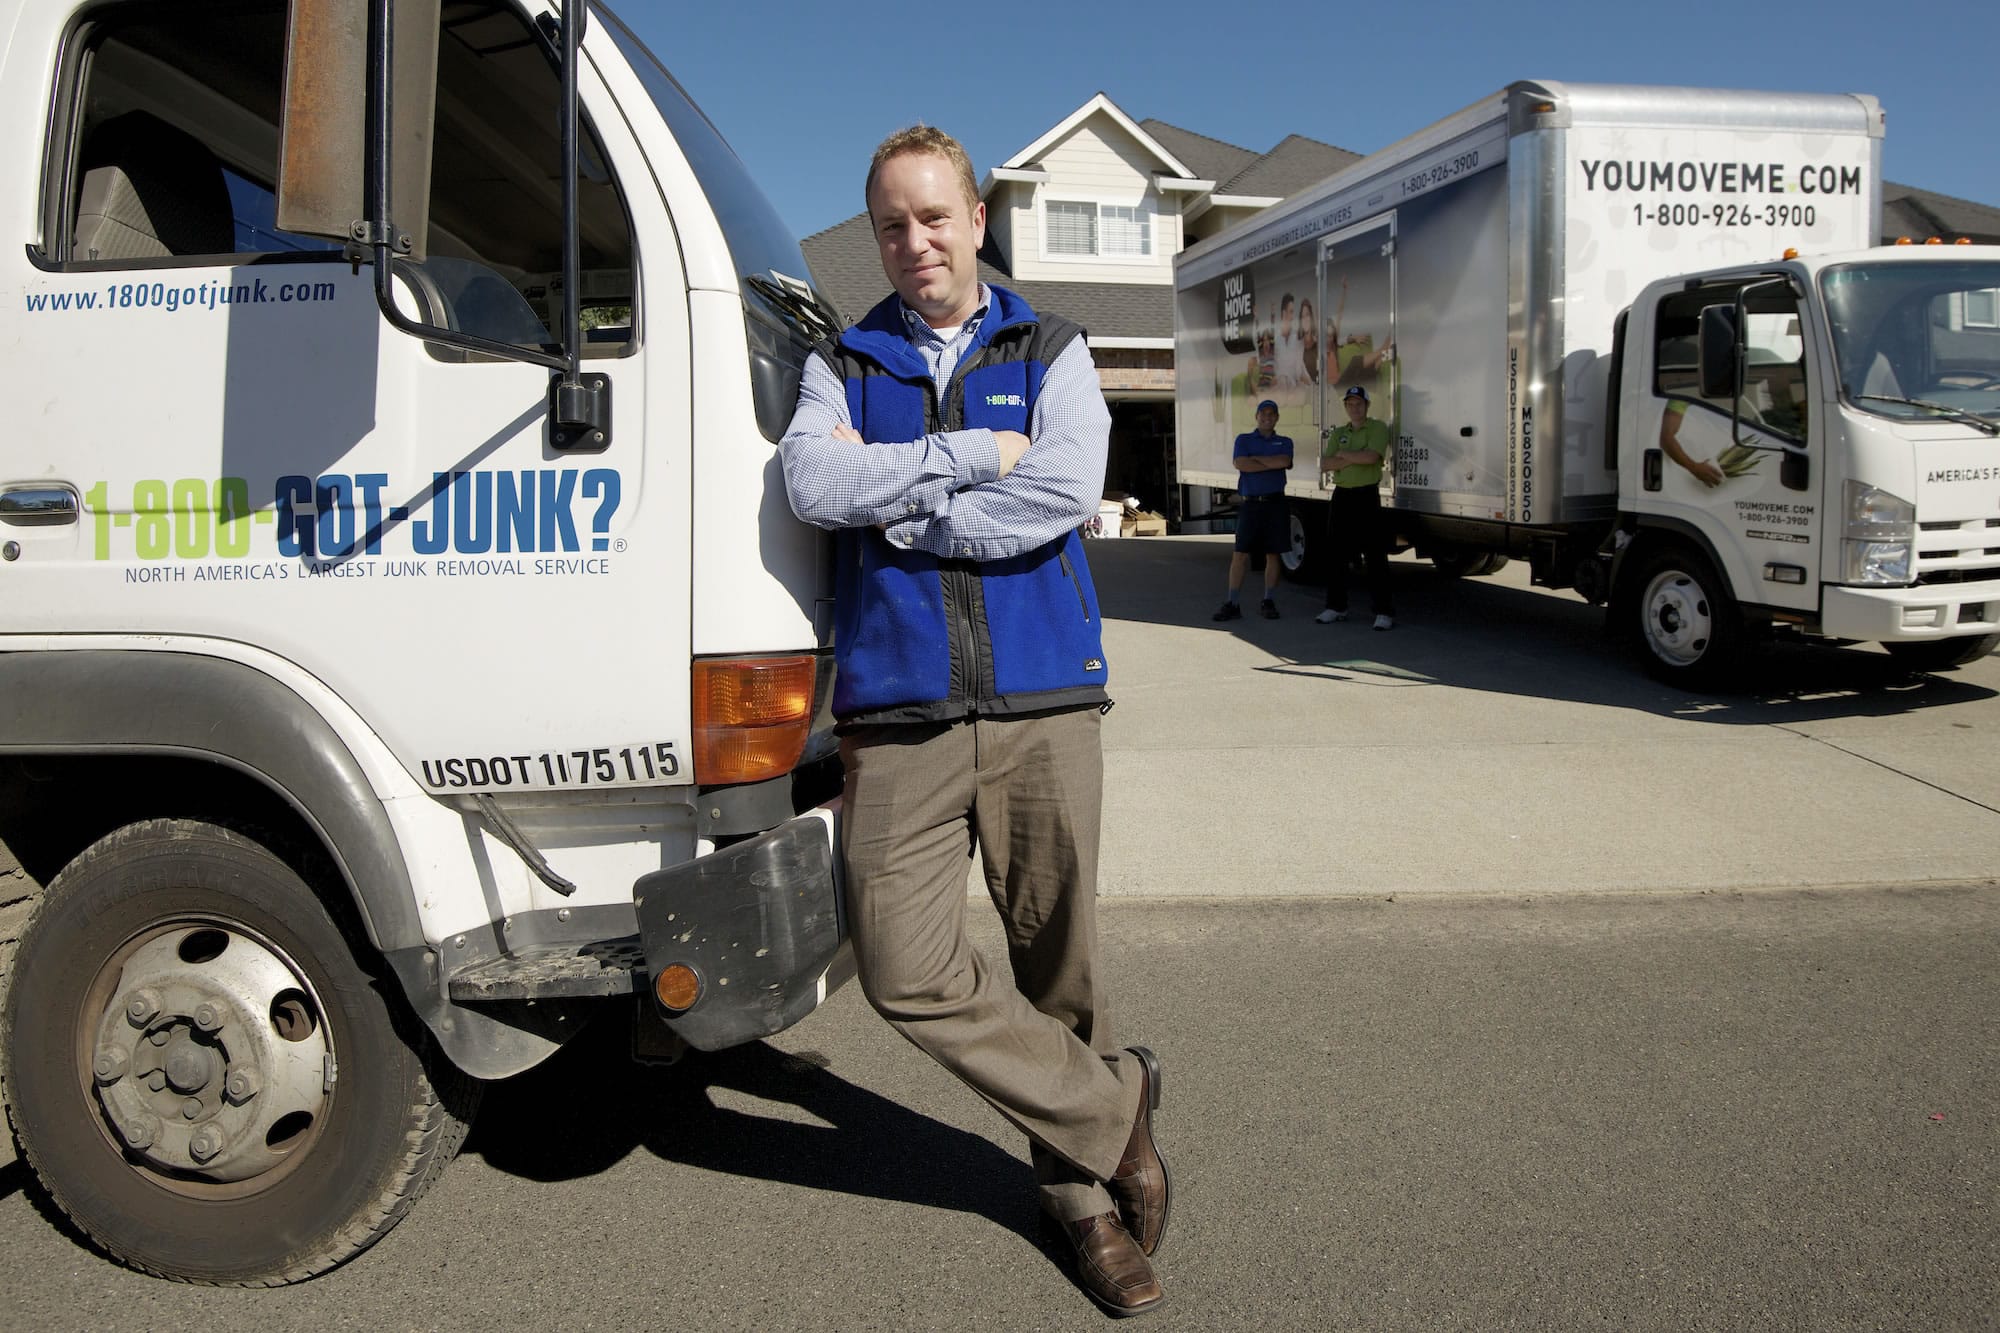 Ben Hoskins, local franchise owner of 1-800-GOT-JUNK and You Move Me, stands outside a customer's home.